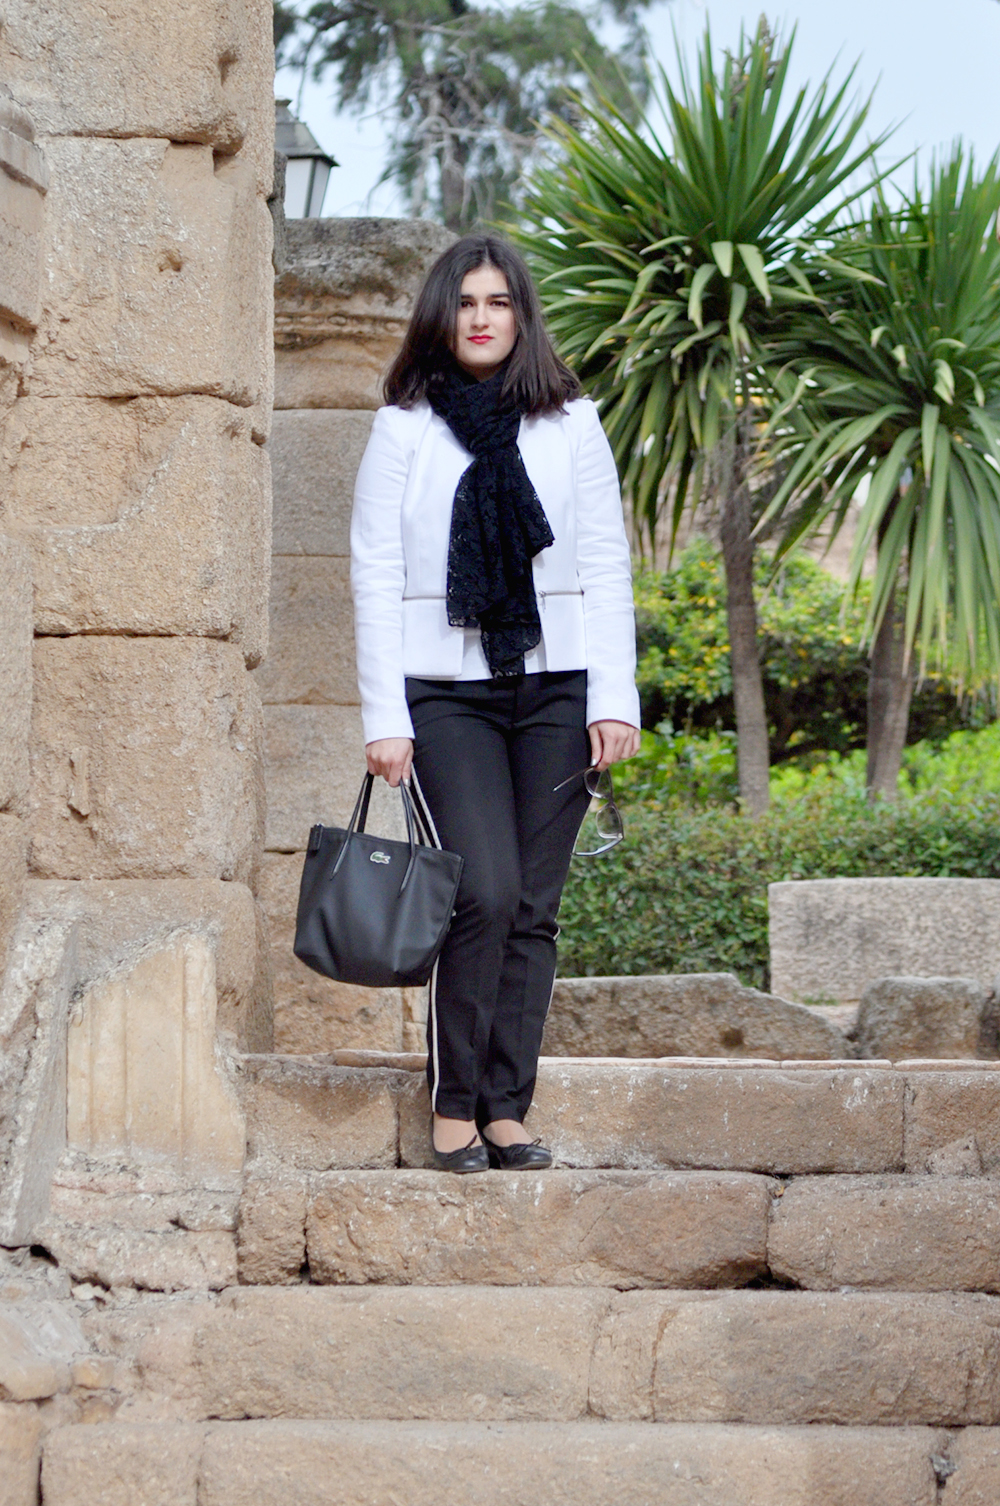 something fashion valencia blogger fblogger spain, teatro merida ancient, outfit, white carroll jacket tailored, comfortable style traveling extremadura trip, ancient architecture roman culture, lacoste mini bag zara scarf